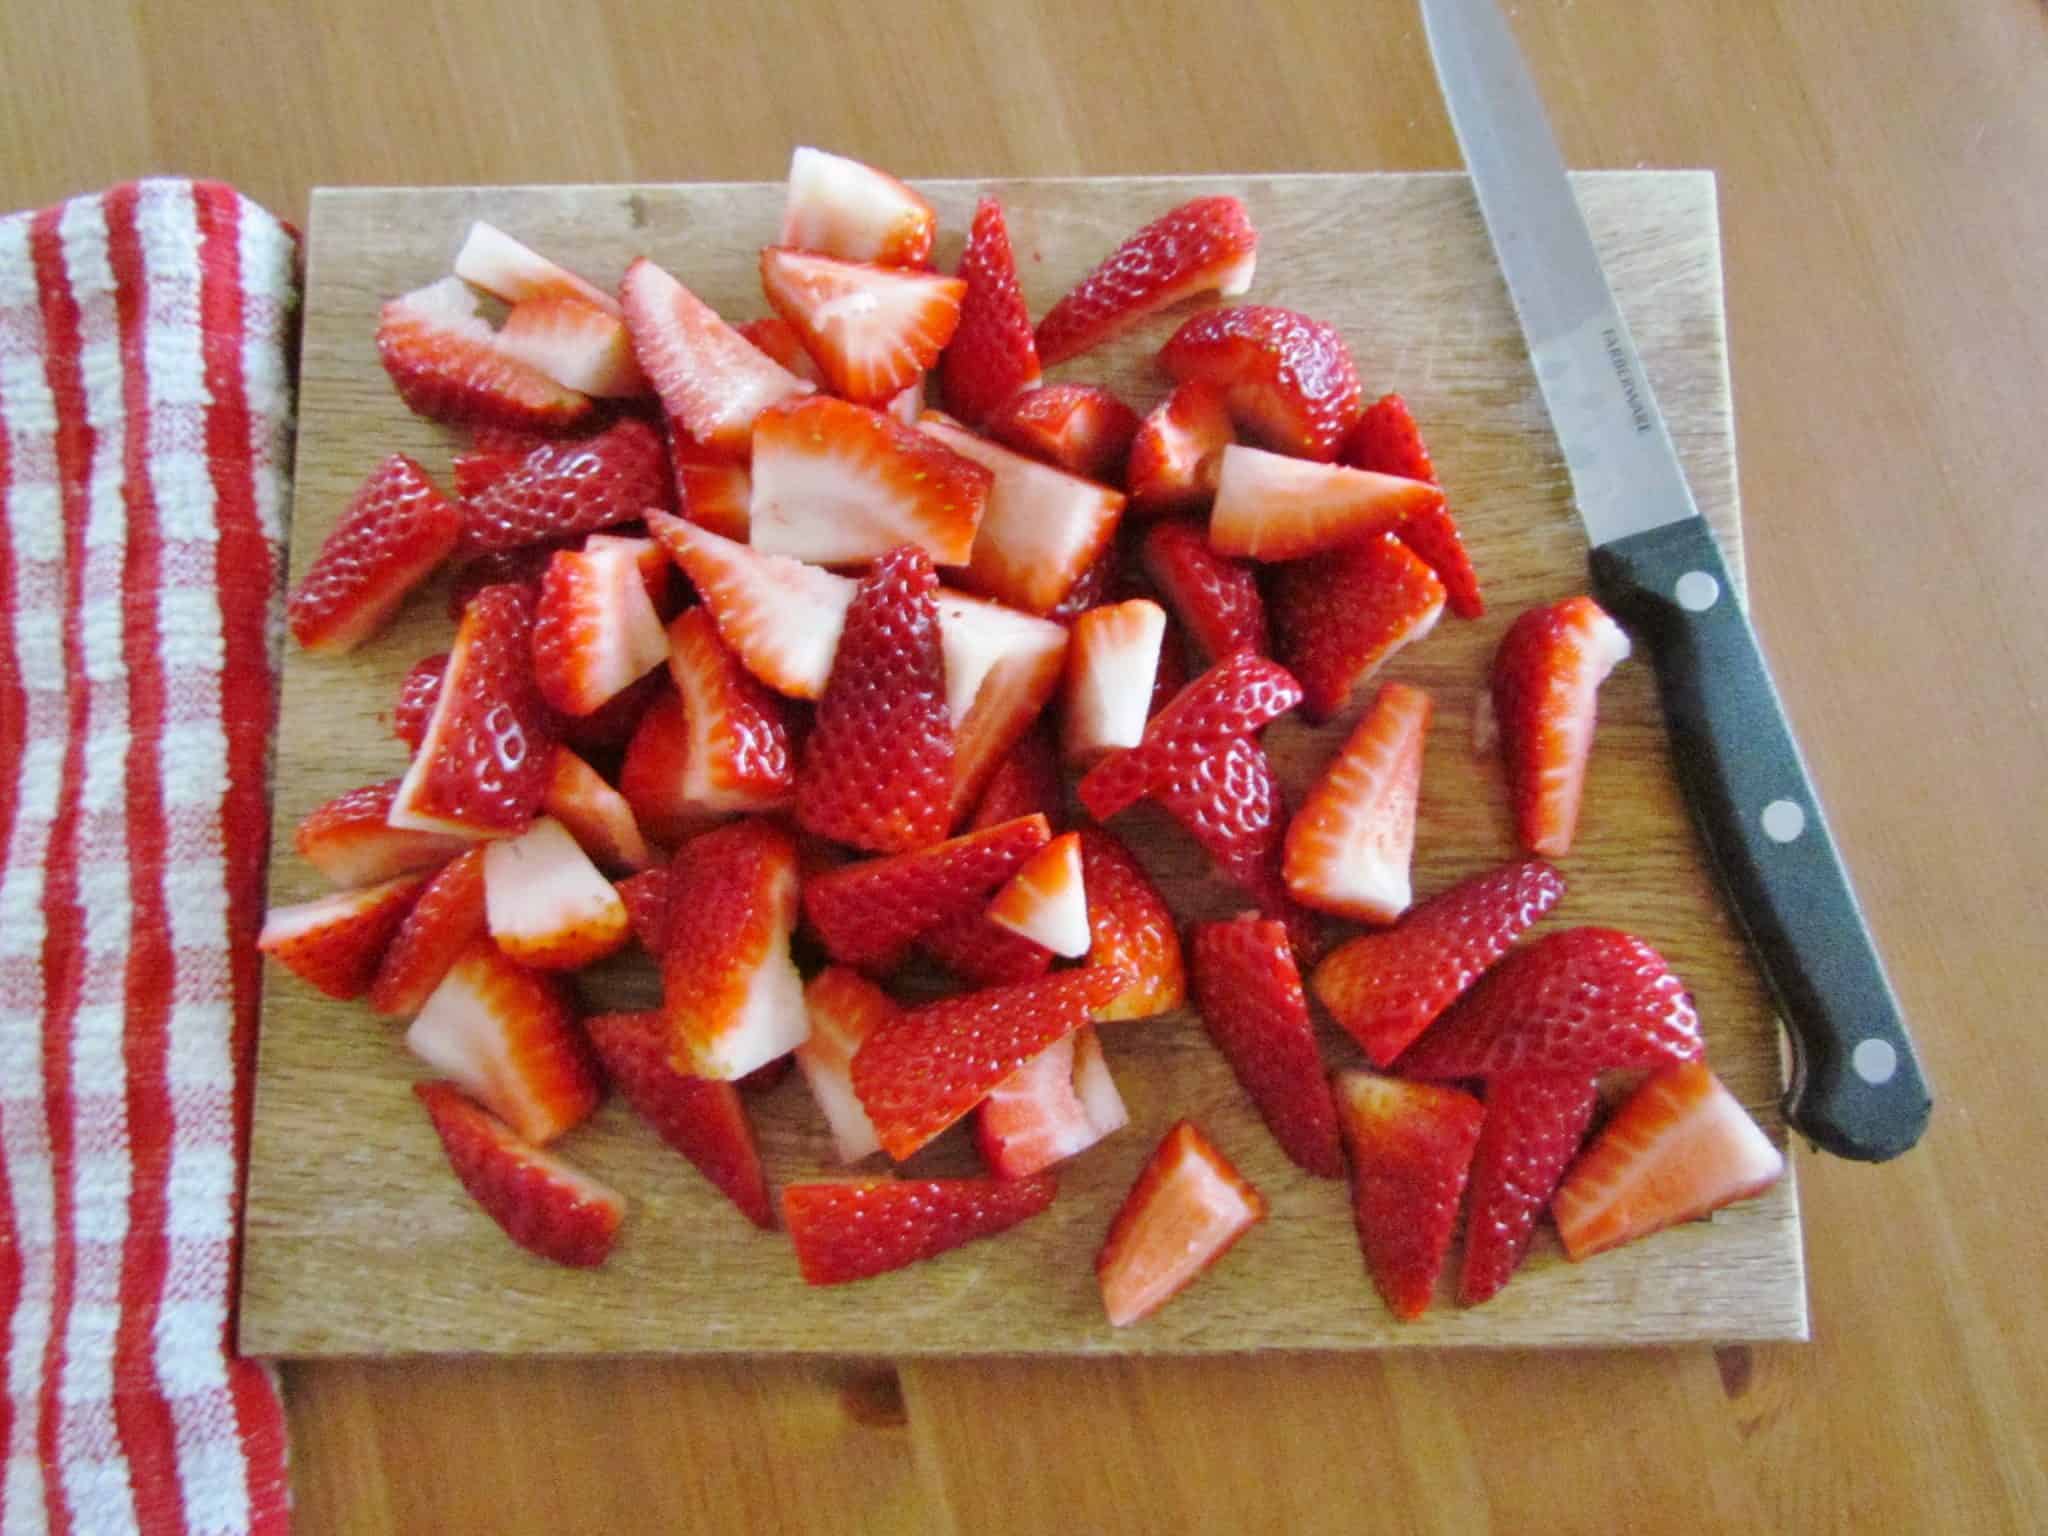 sliced strawberries on a wooden cutting board.